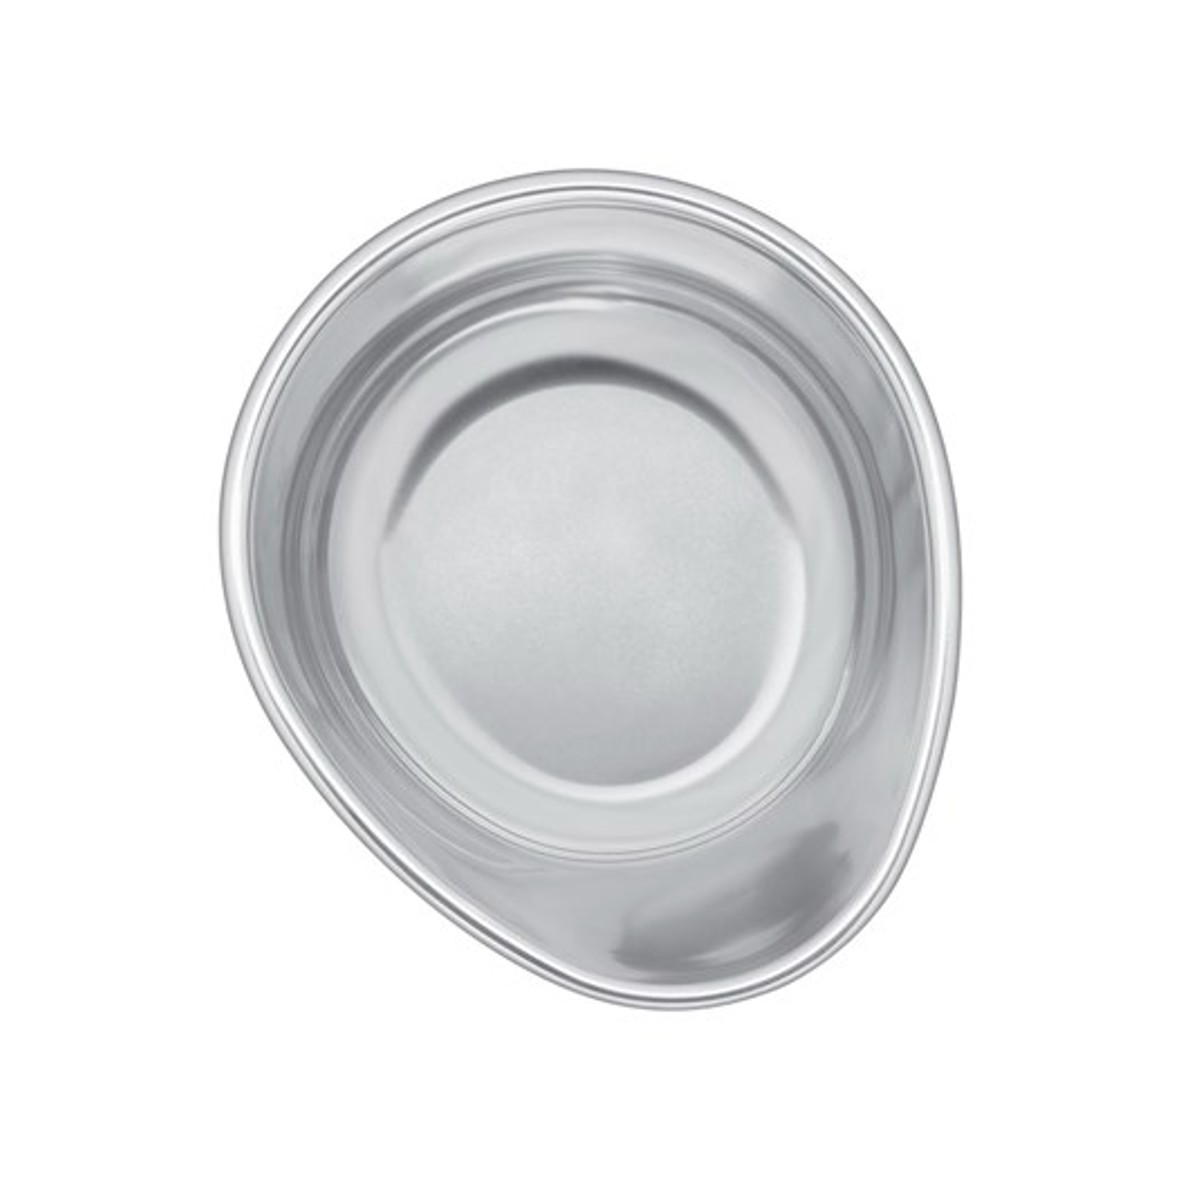 https://images.baxterboo.com/global/images/products/large/weathertech-replacement-dog-bowls-for-feeding-system-stainless-steel-5404.jpg